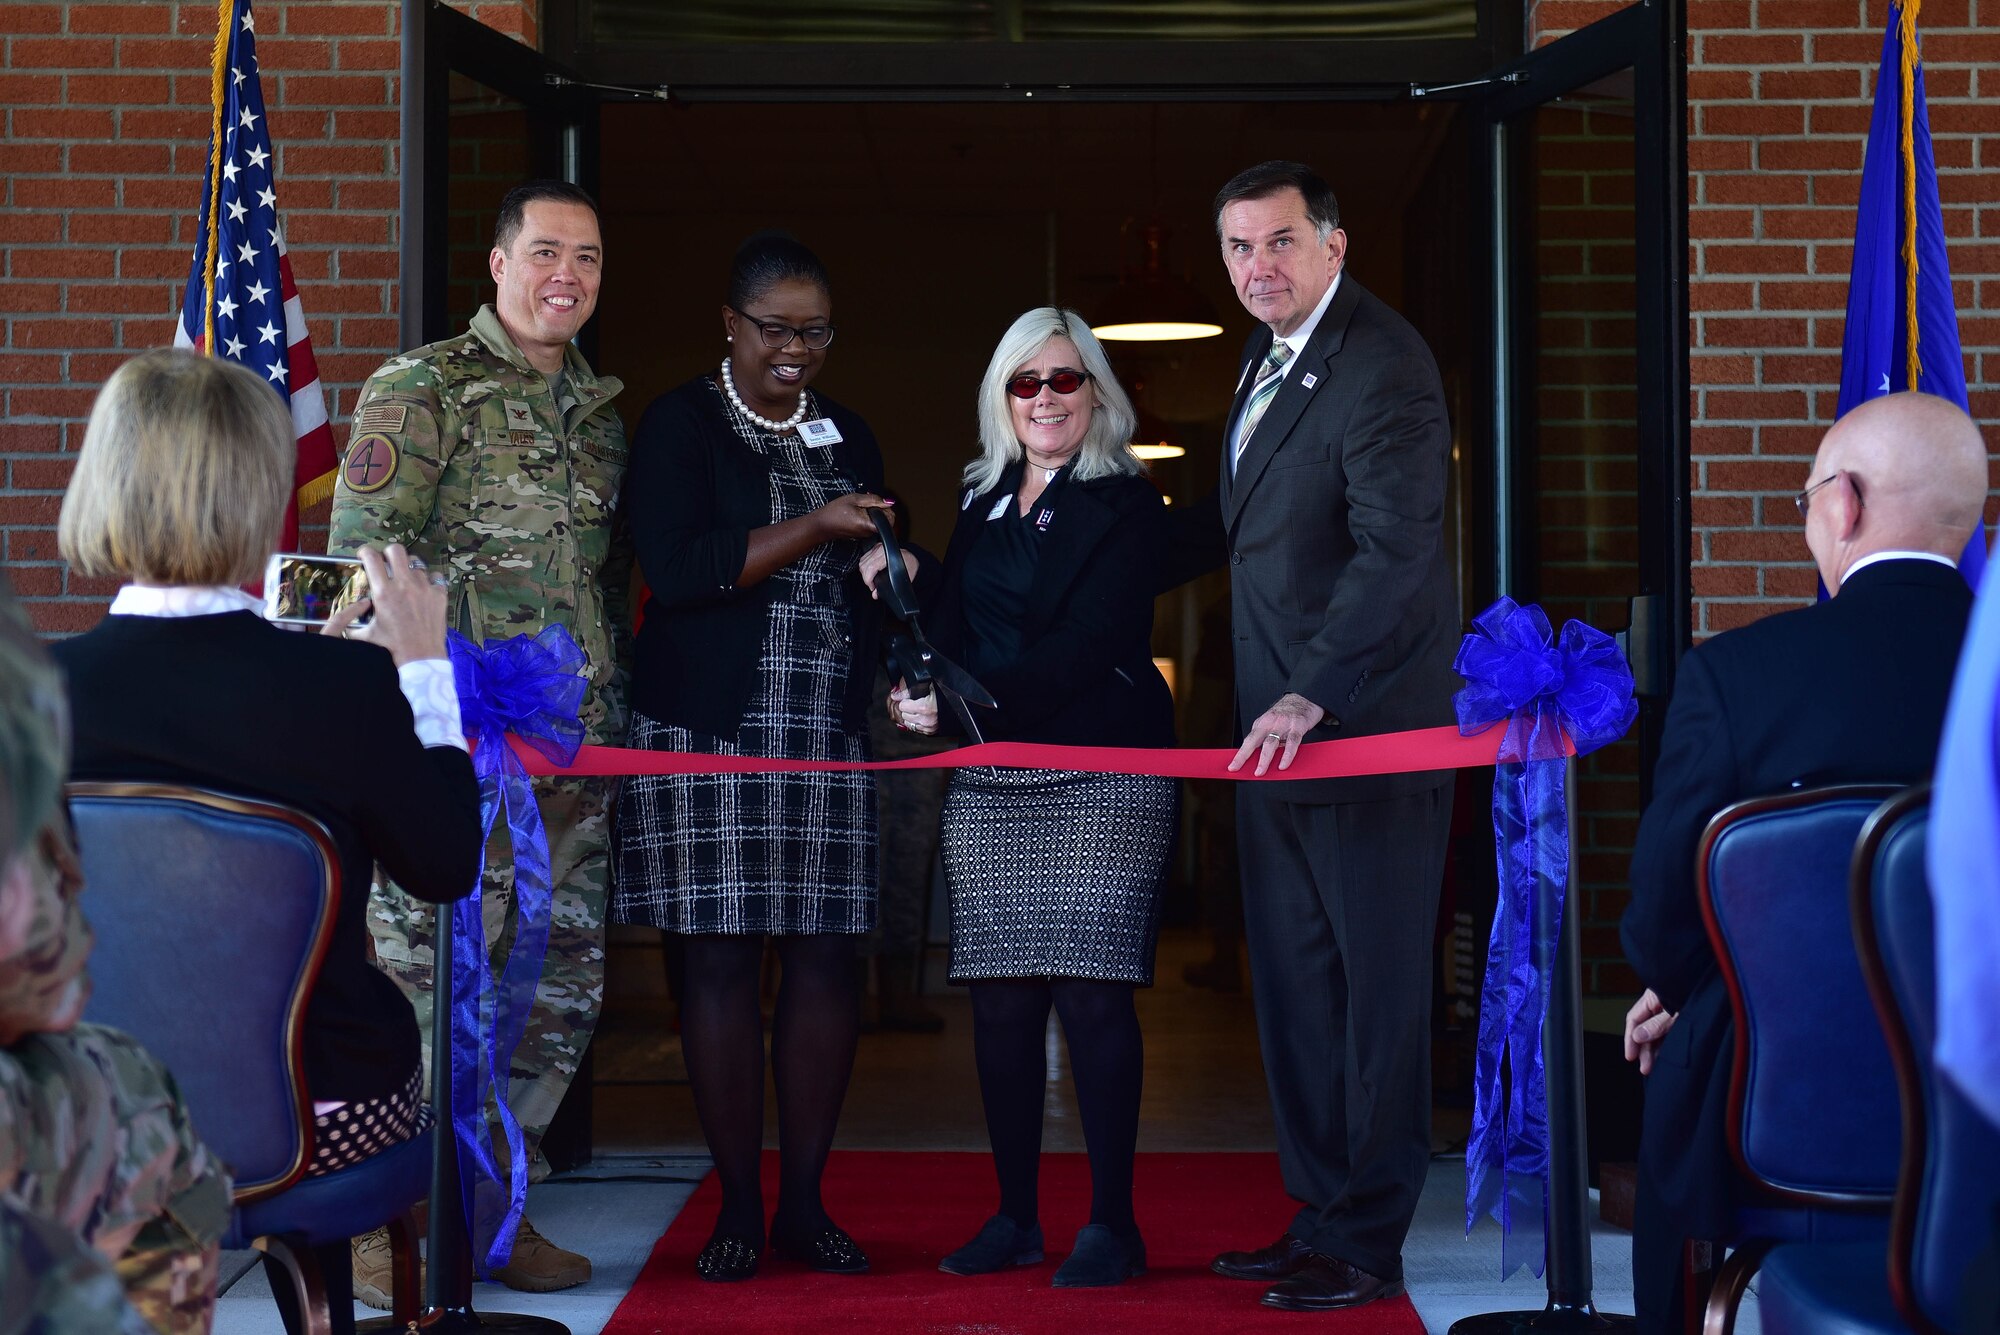 Col. Donn Yates, 4th Fighter Wing commander, left, along with members of the USO of North Carolina cut the ribbon during a ceremony marking the opening of a new USO of North Carolina center, Nov. 21, 2019, at Seymour Johnson Air Force Base, N.C. The new USO of NC – SJAFB Center will serve the more than 6,000 Airmen stationed on base, along with any other DOD ID card holder. (U.S. Air Force photo by Senior Airman Victoria Boyton)